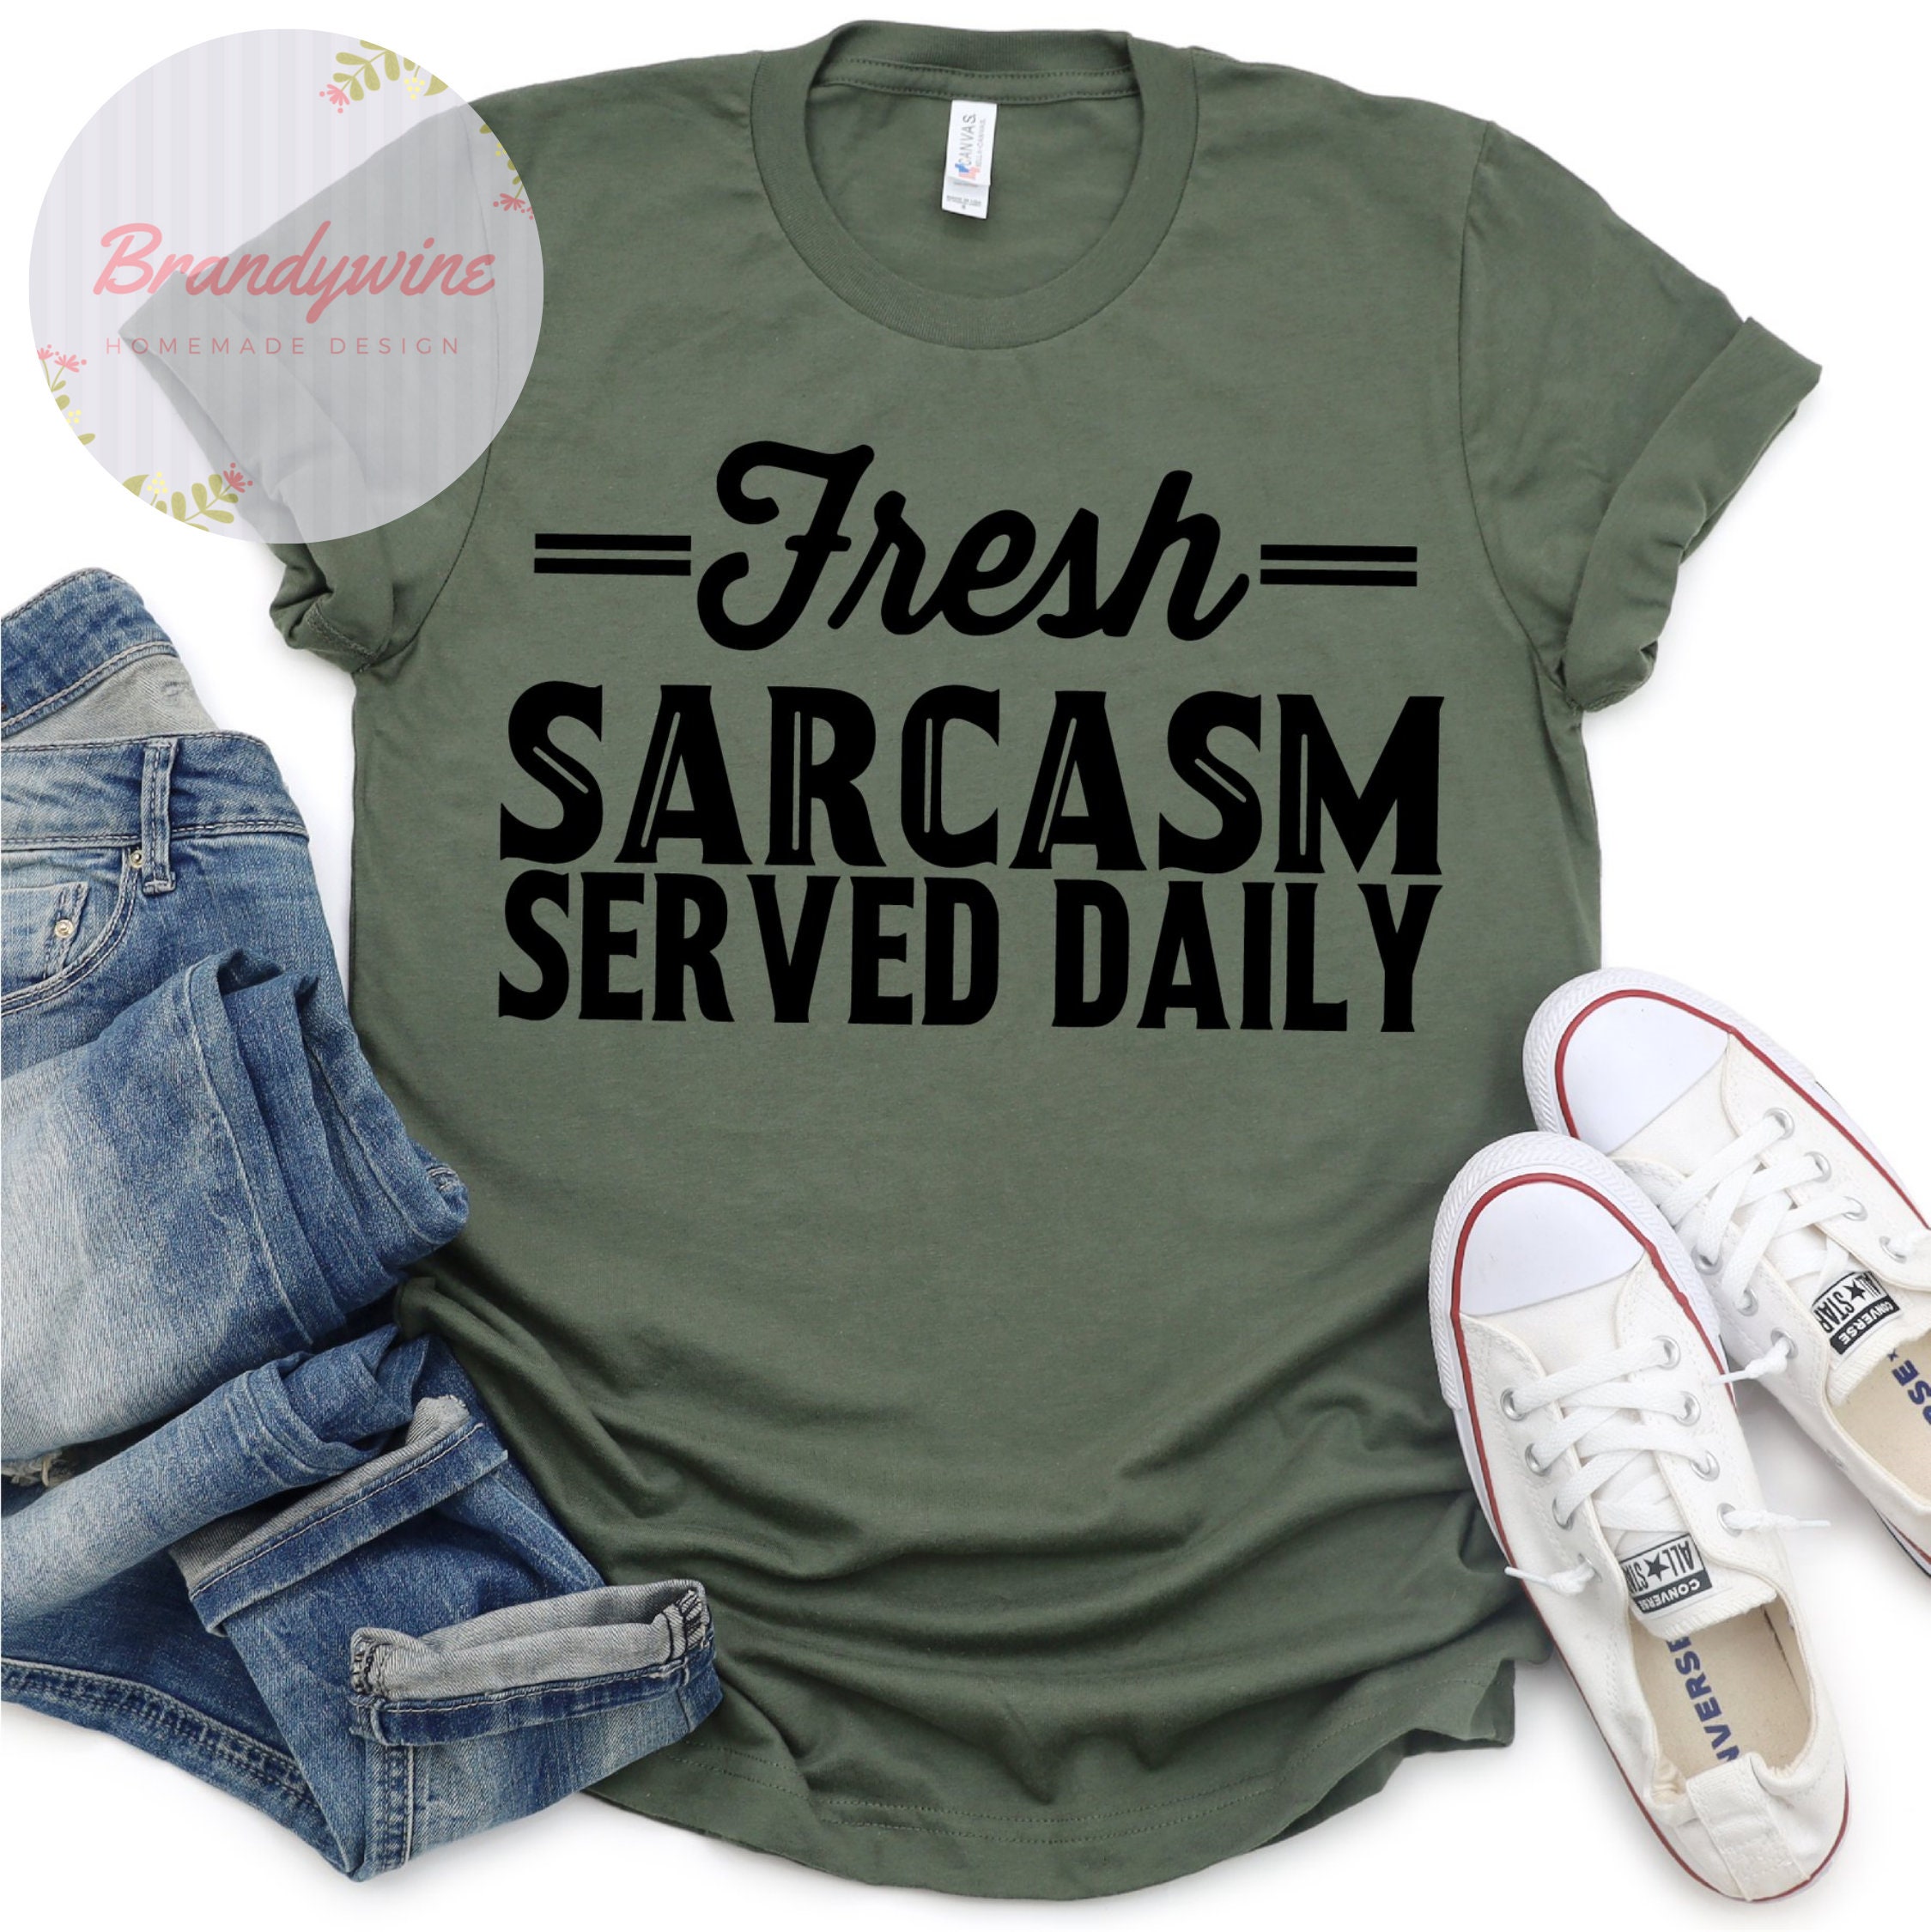 Fresh Sarcasm Served Daily Shirt Funny Shirt for Her Gift photo